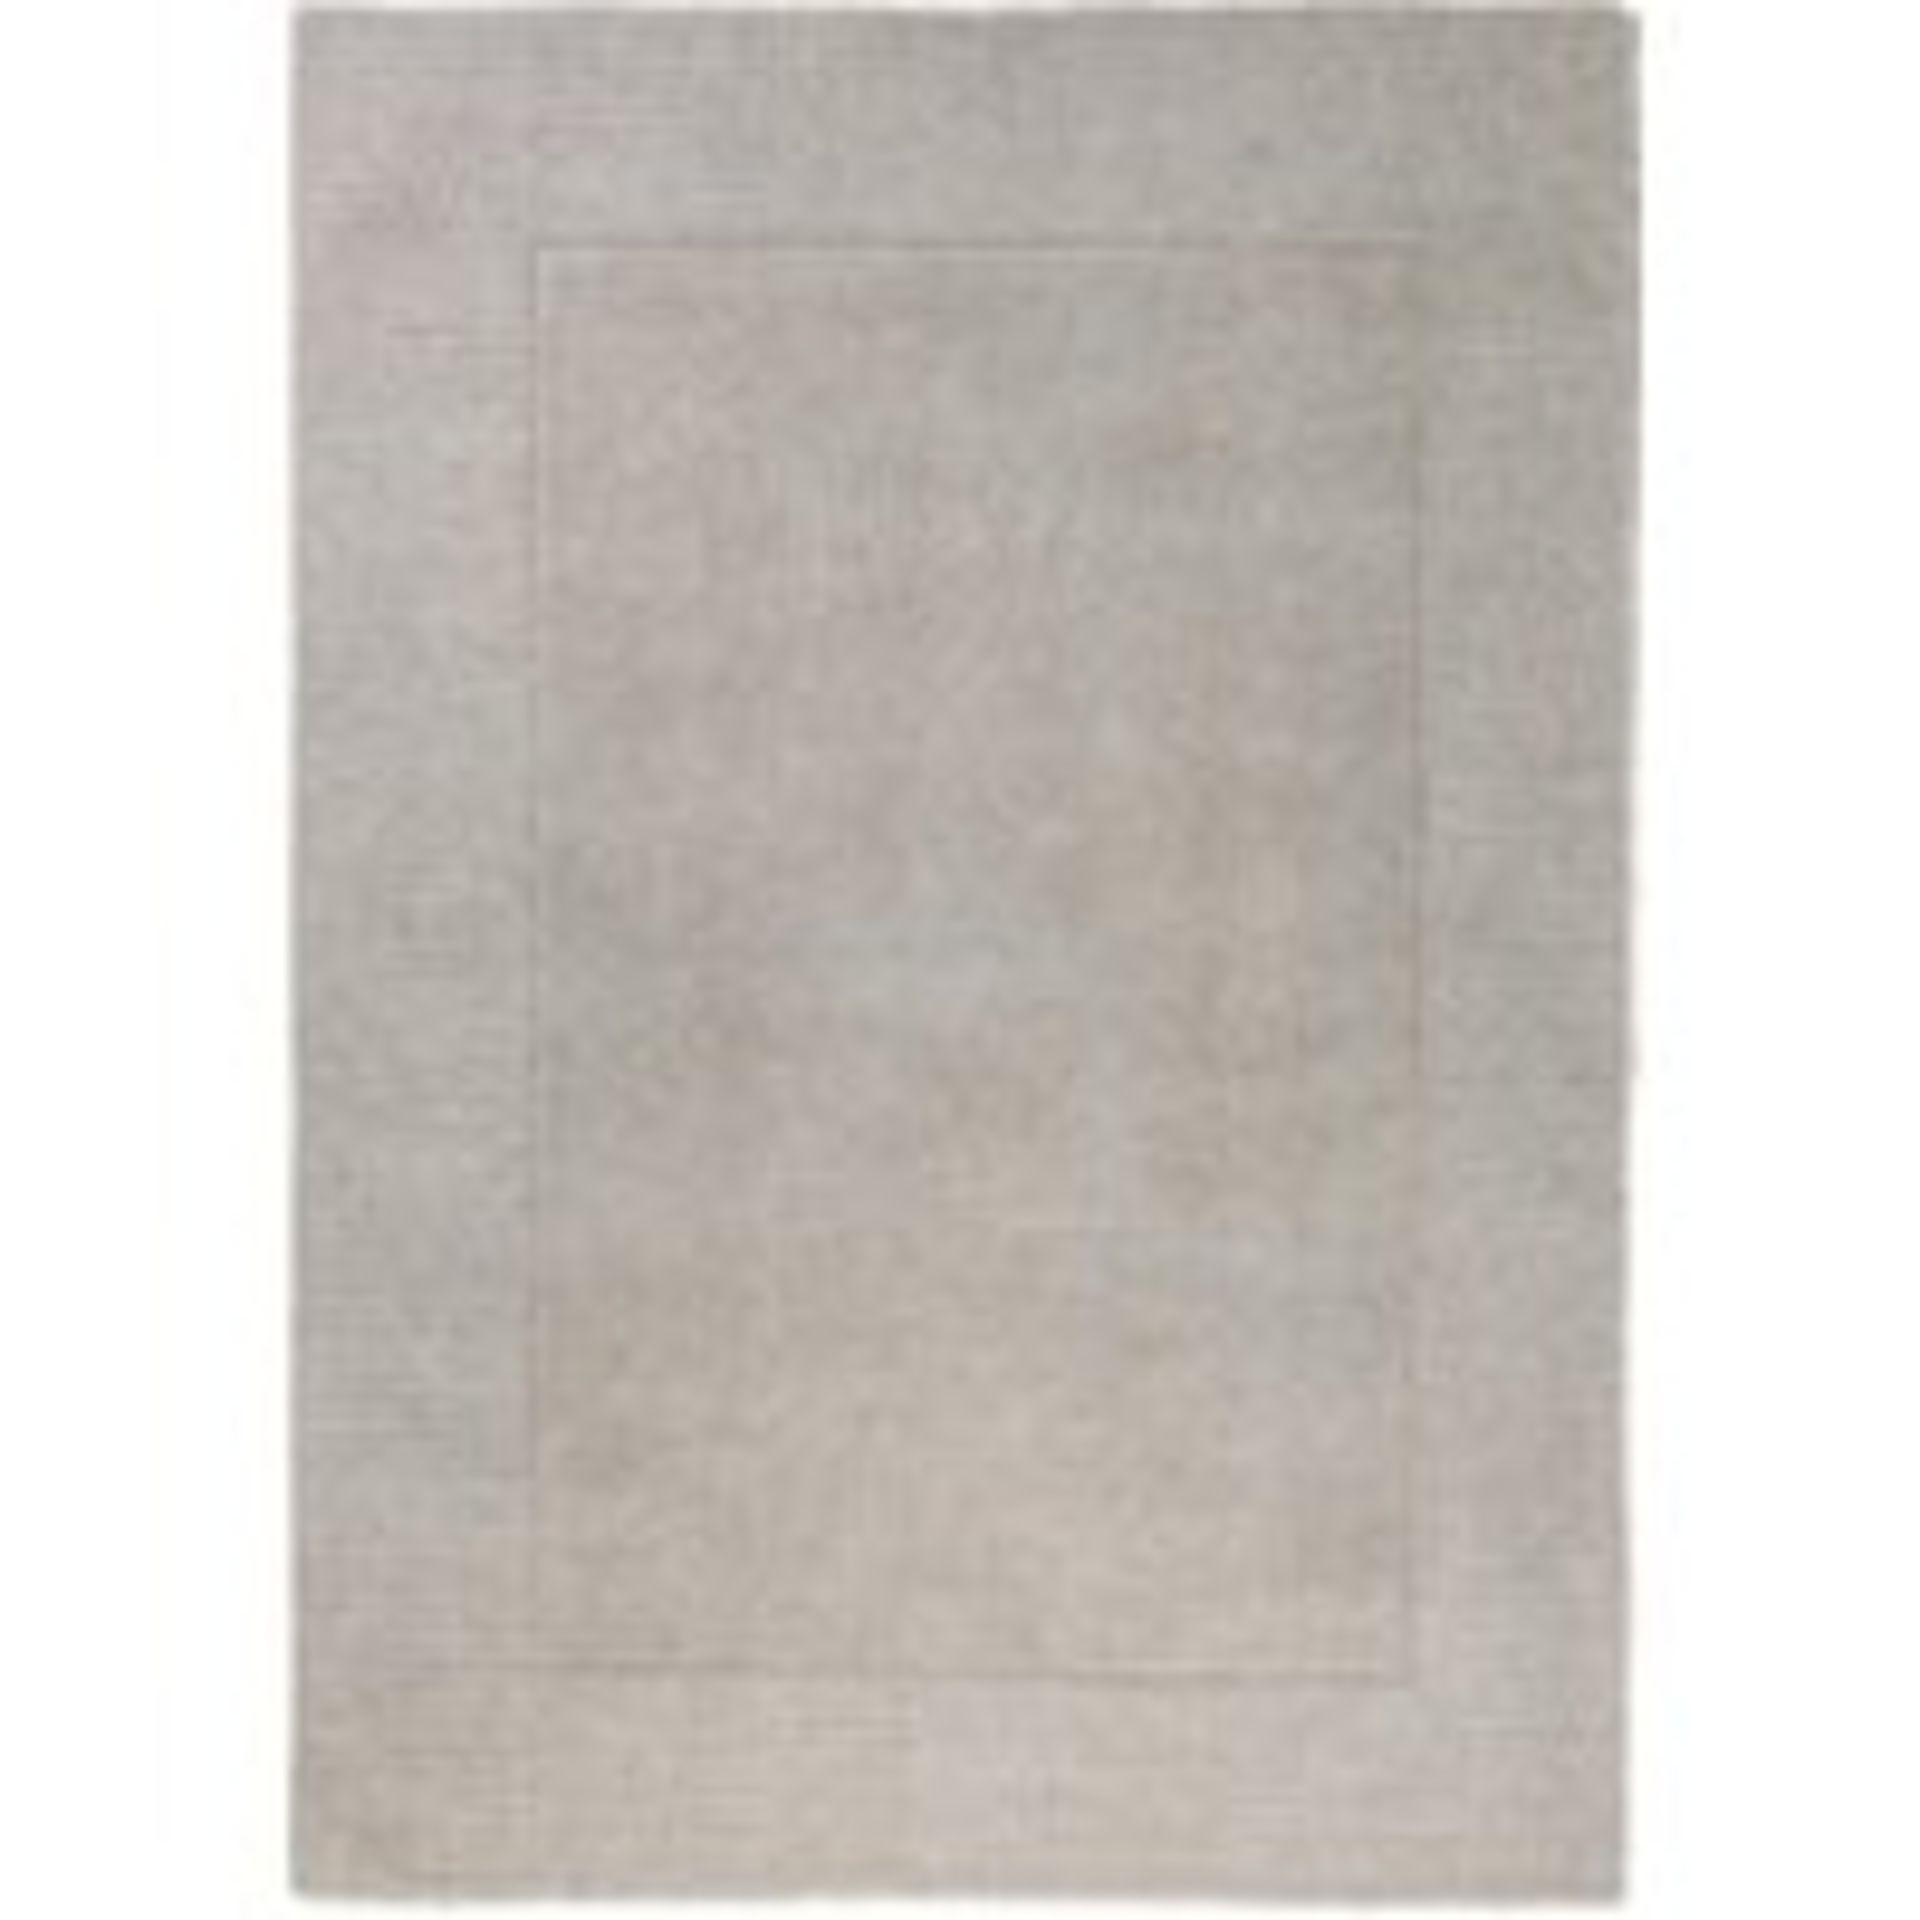 Boston Wool Border Tuscany D040 Natural Rectangle Rug 200X290cm RRP 219.00About the Product(s)Boston